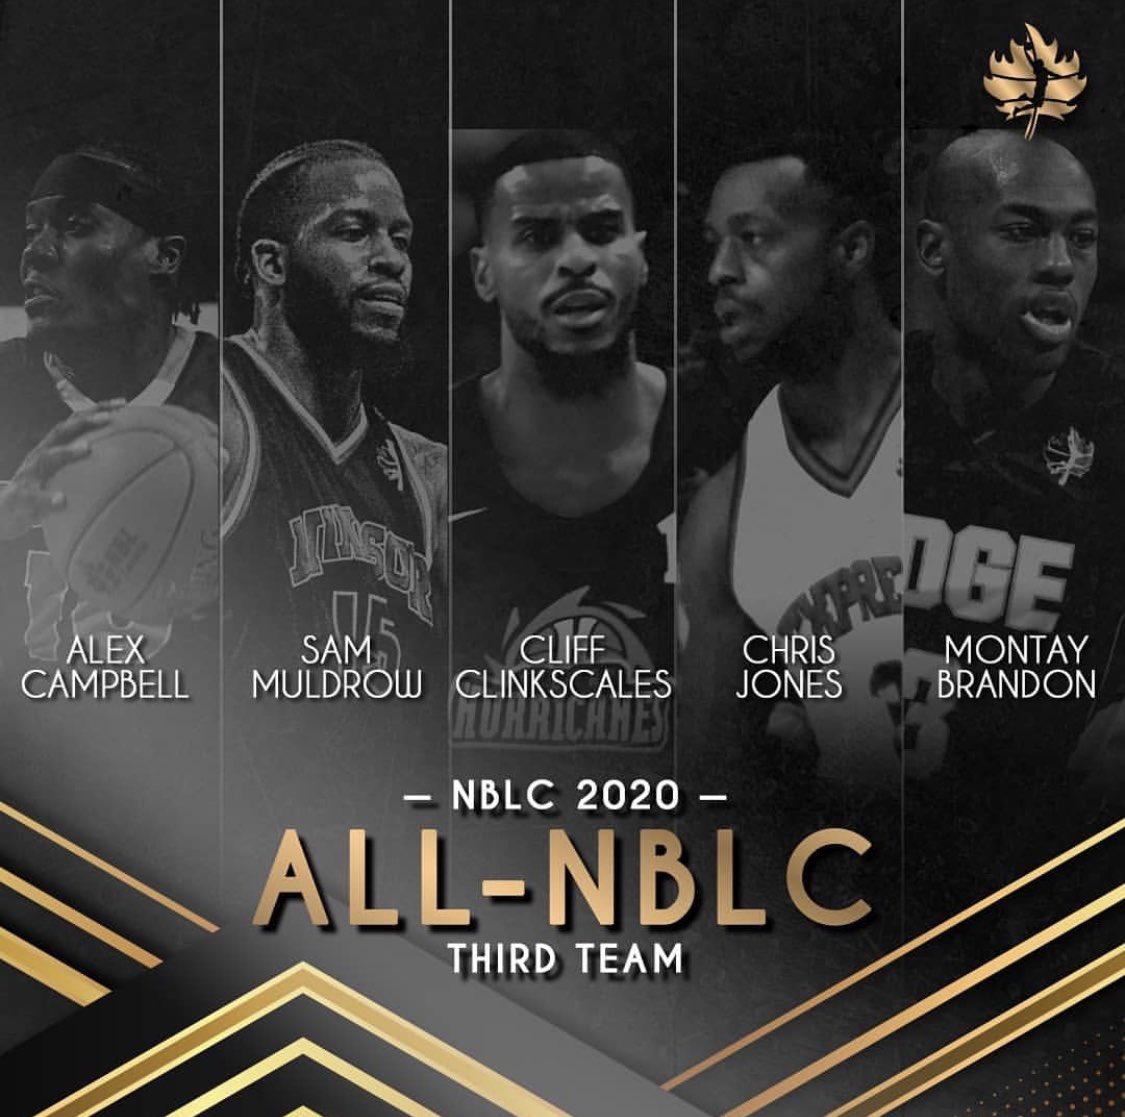 A legend. Our captain. Congrats @DaBiz12 on being named All-NBLC Third Team!